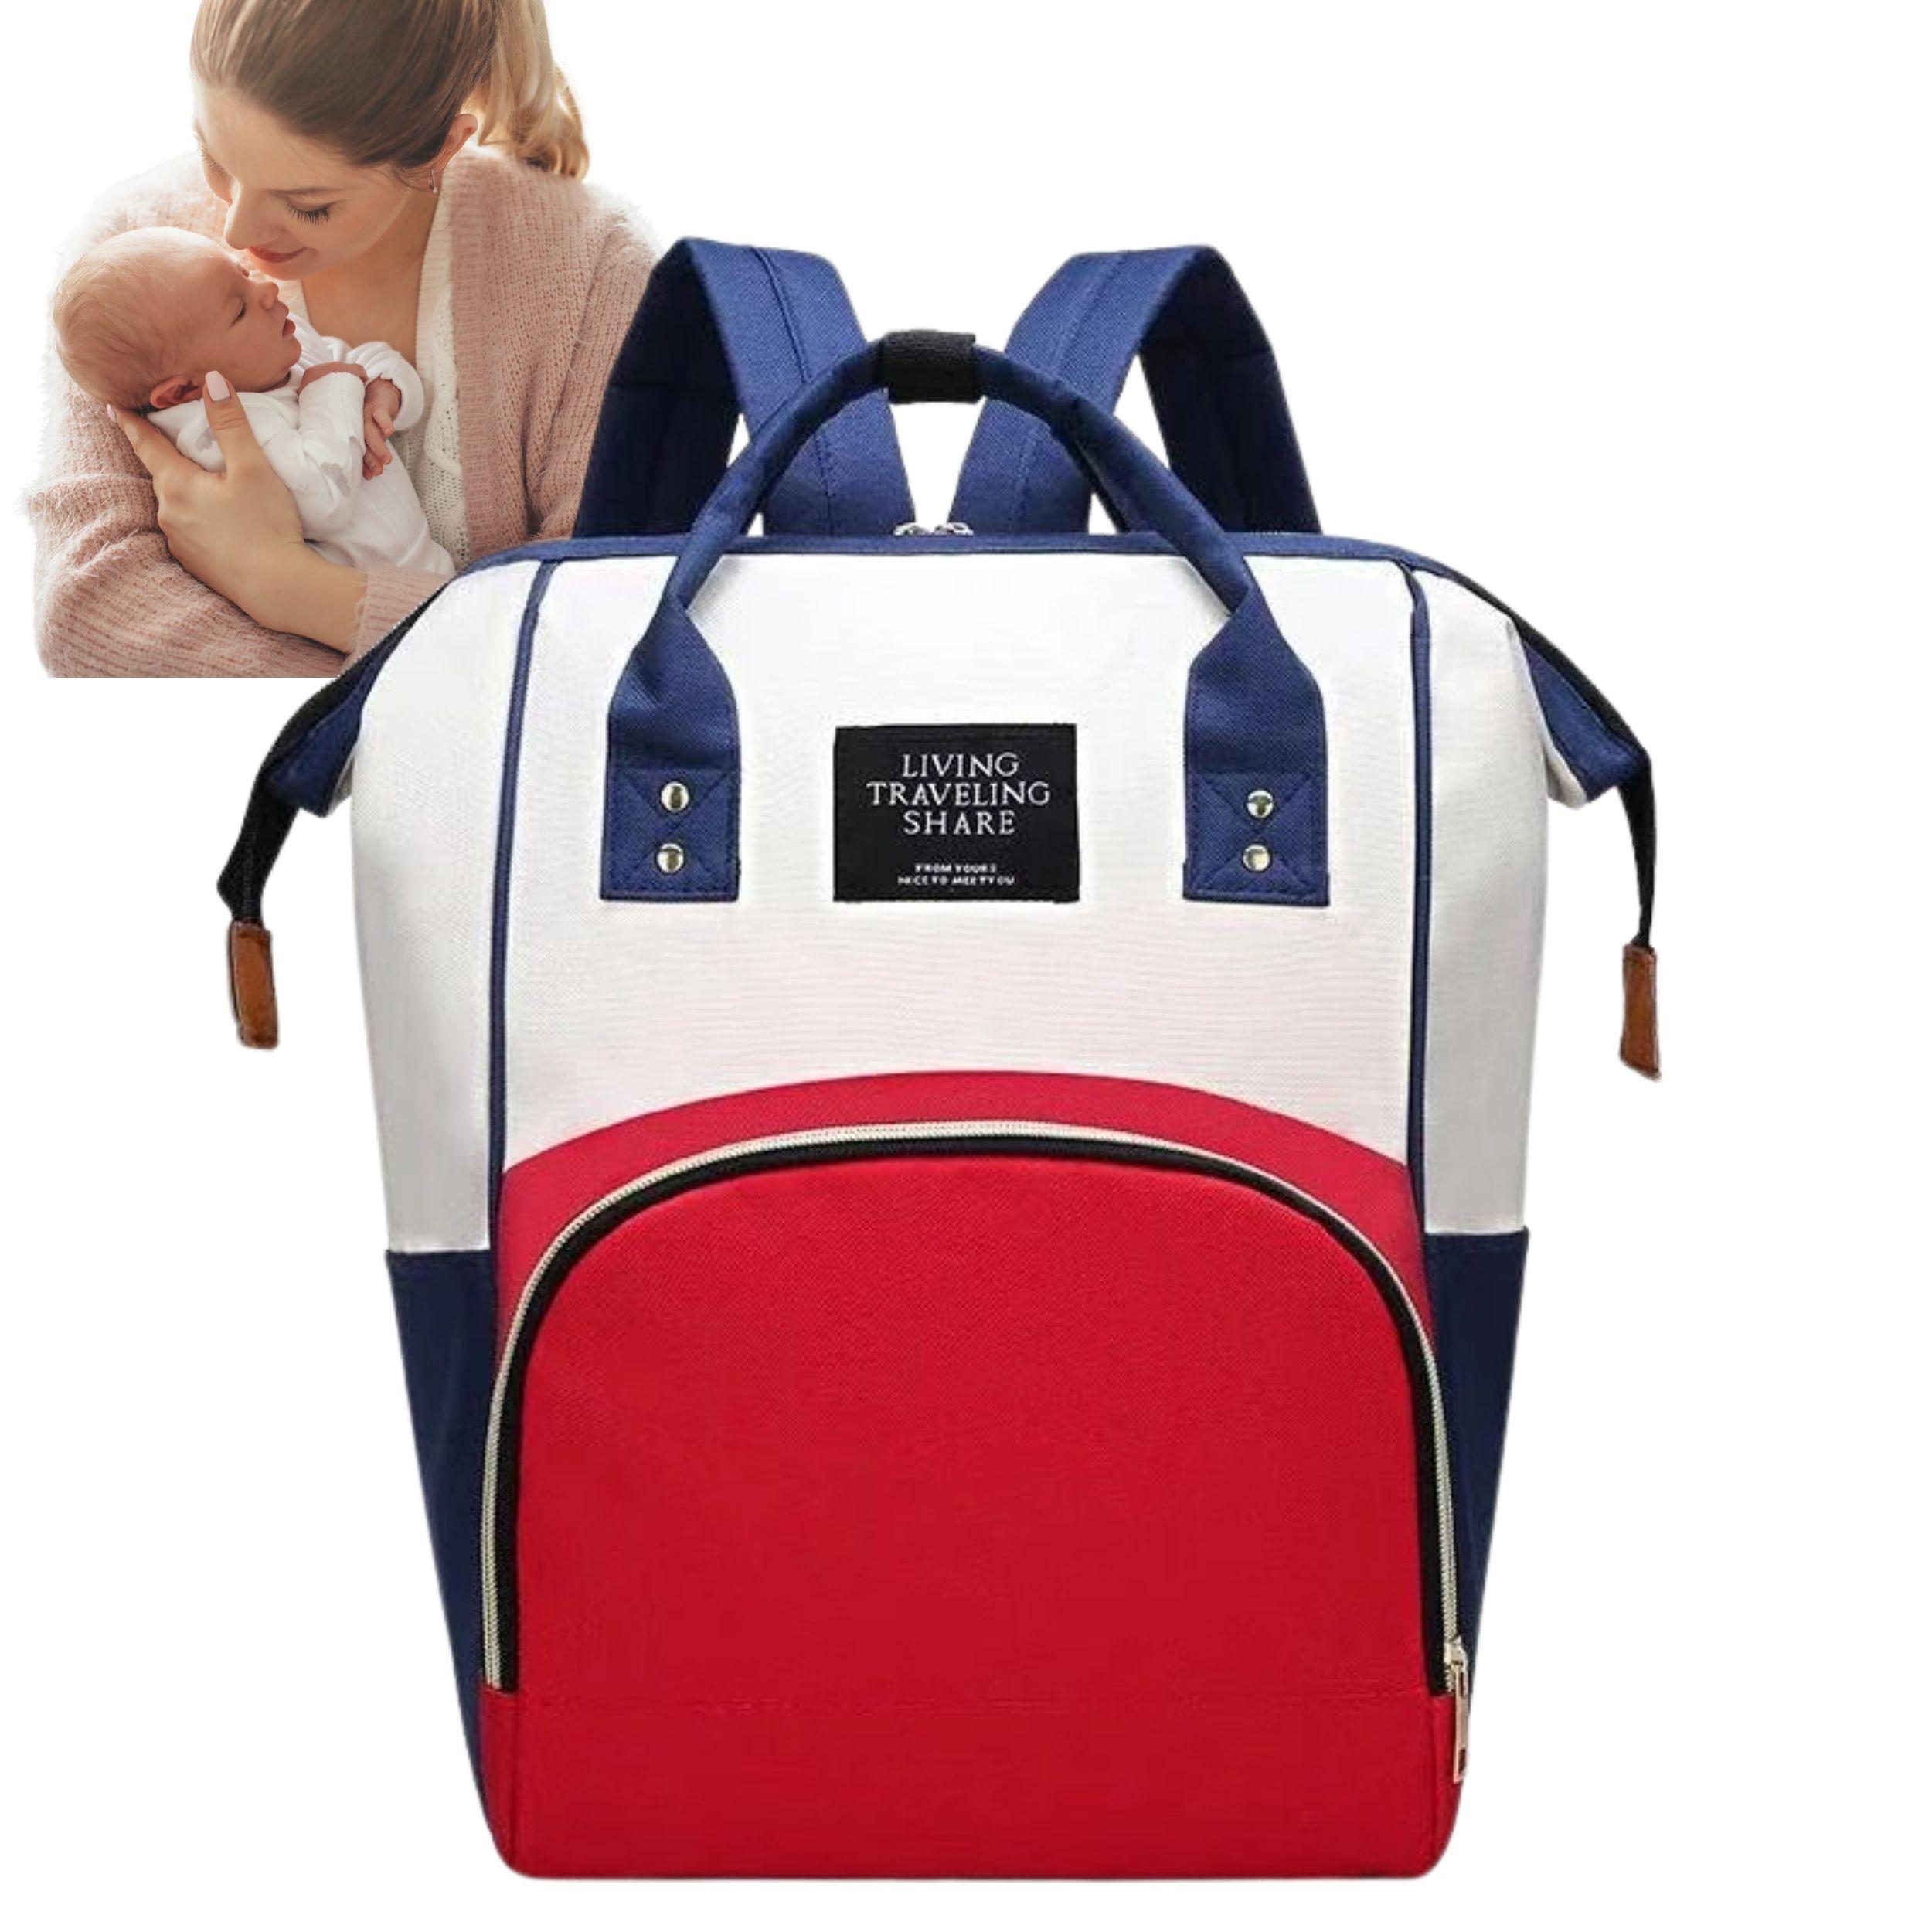 Backpack / bag for mum - white, red and blue